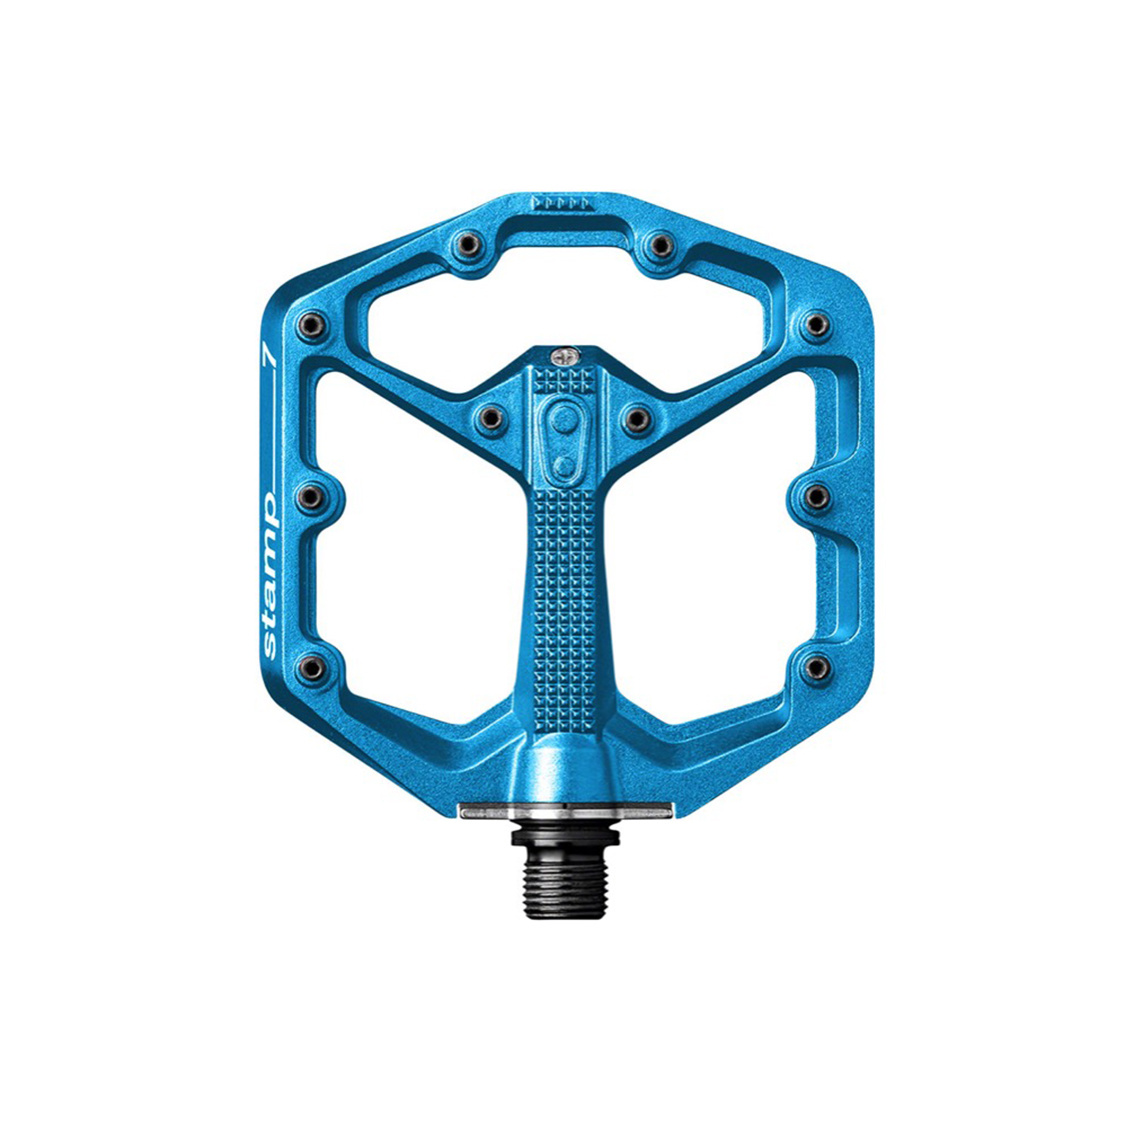 Crankbrothers Stamp 7 Pedals Small Black